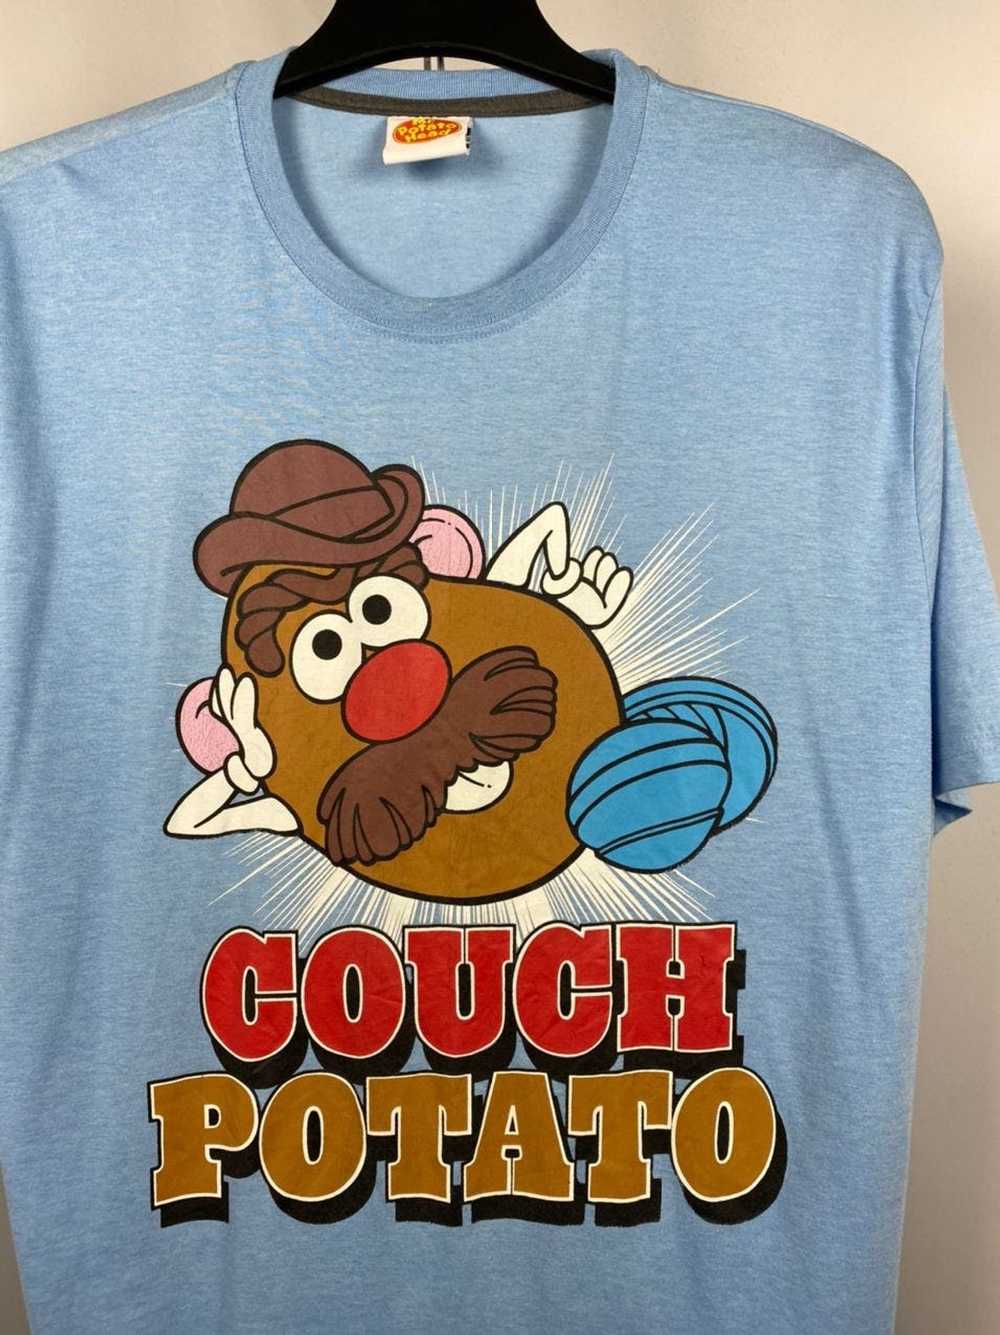 Band Tees × Movie × Vintage Mr. couch potato vint… - image 2